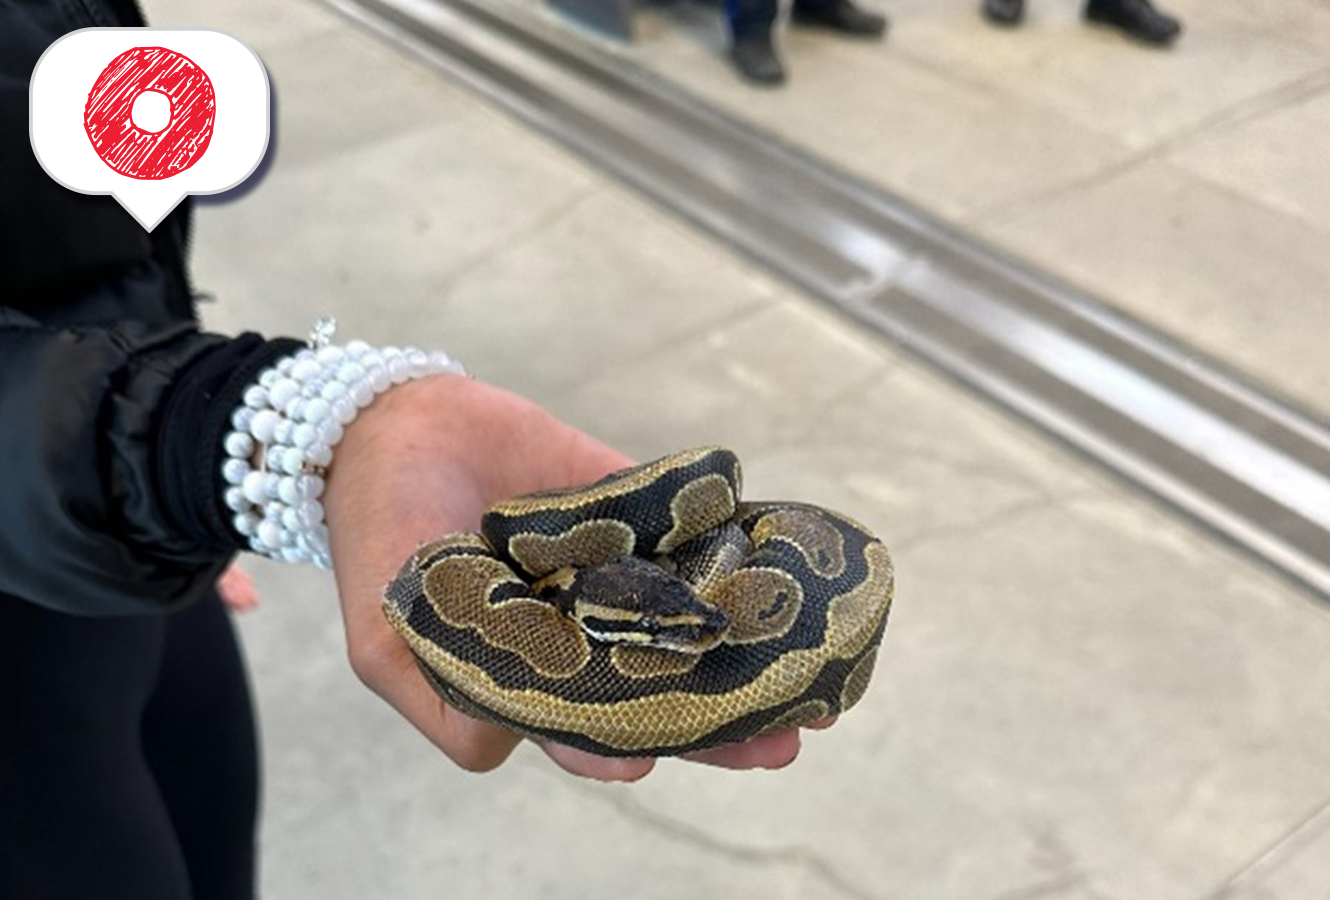 Python reunited with its owner at Hurdman Station